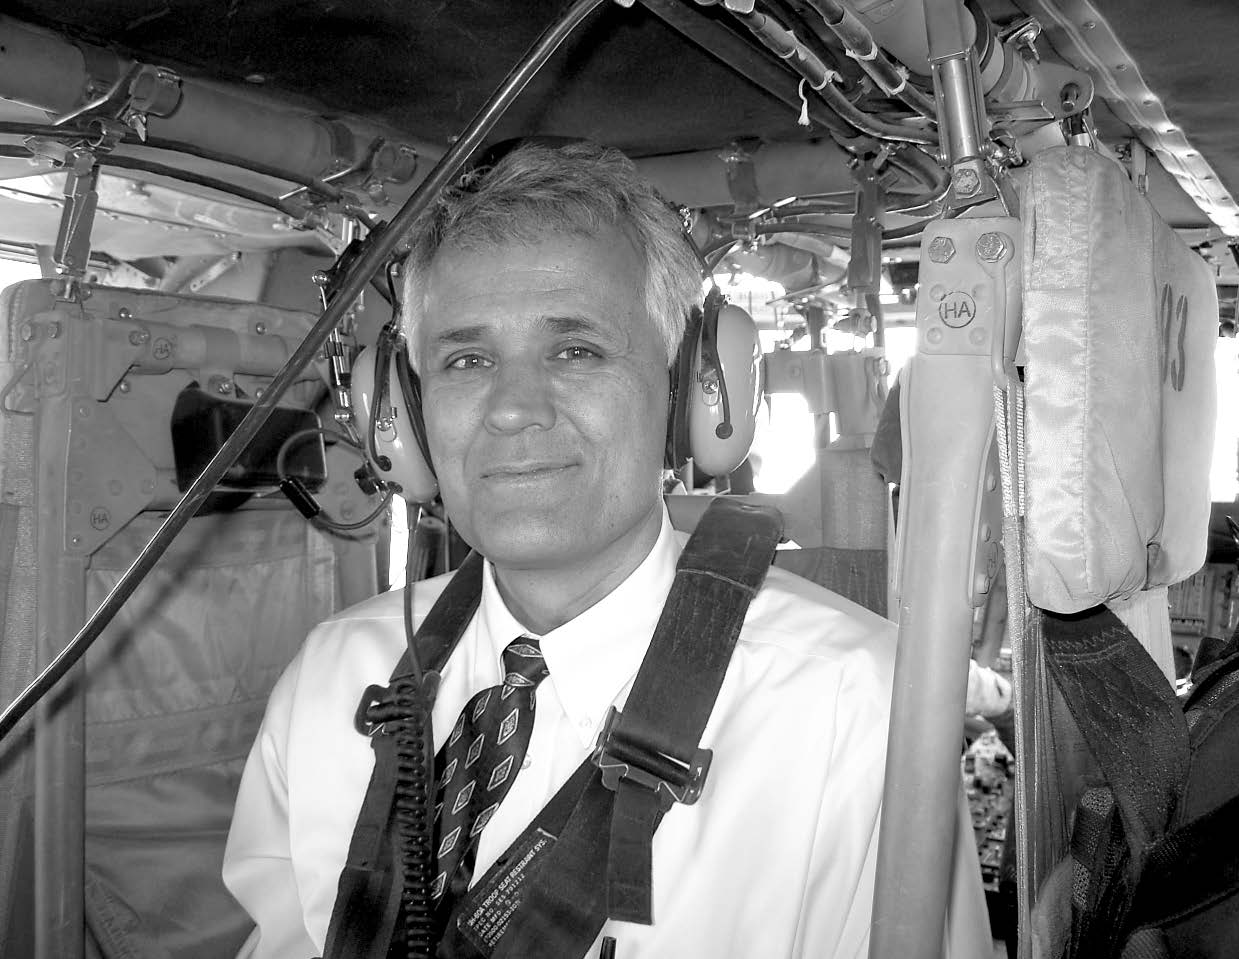 Elder William Jackson’s employment as a U.S. Foreign Service physician enabled him to travel throughout Afghanistan. Courtesy of Mark Allison.